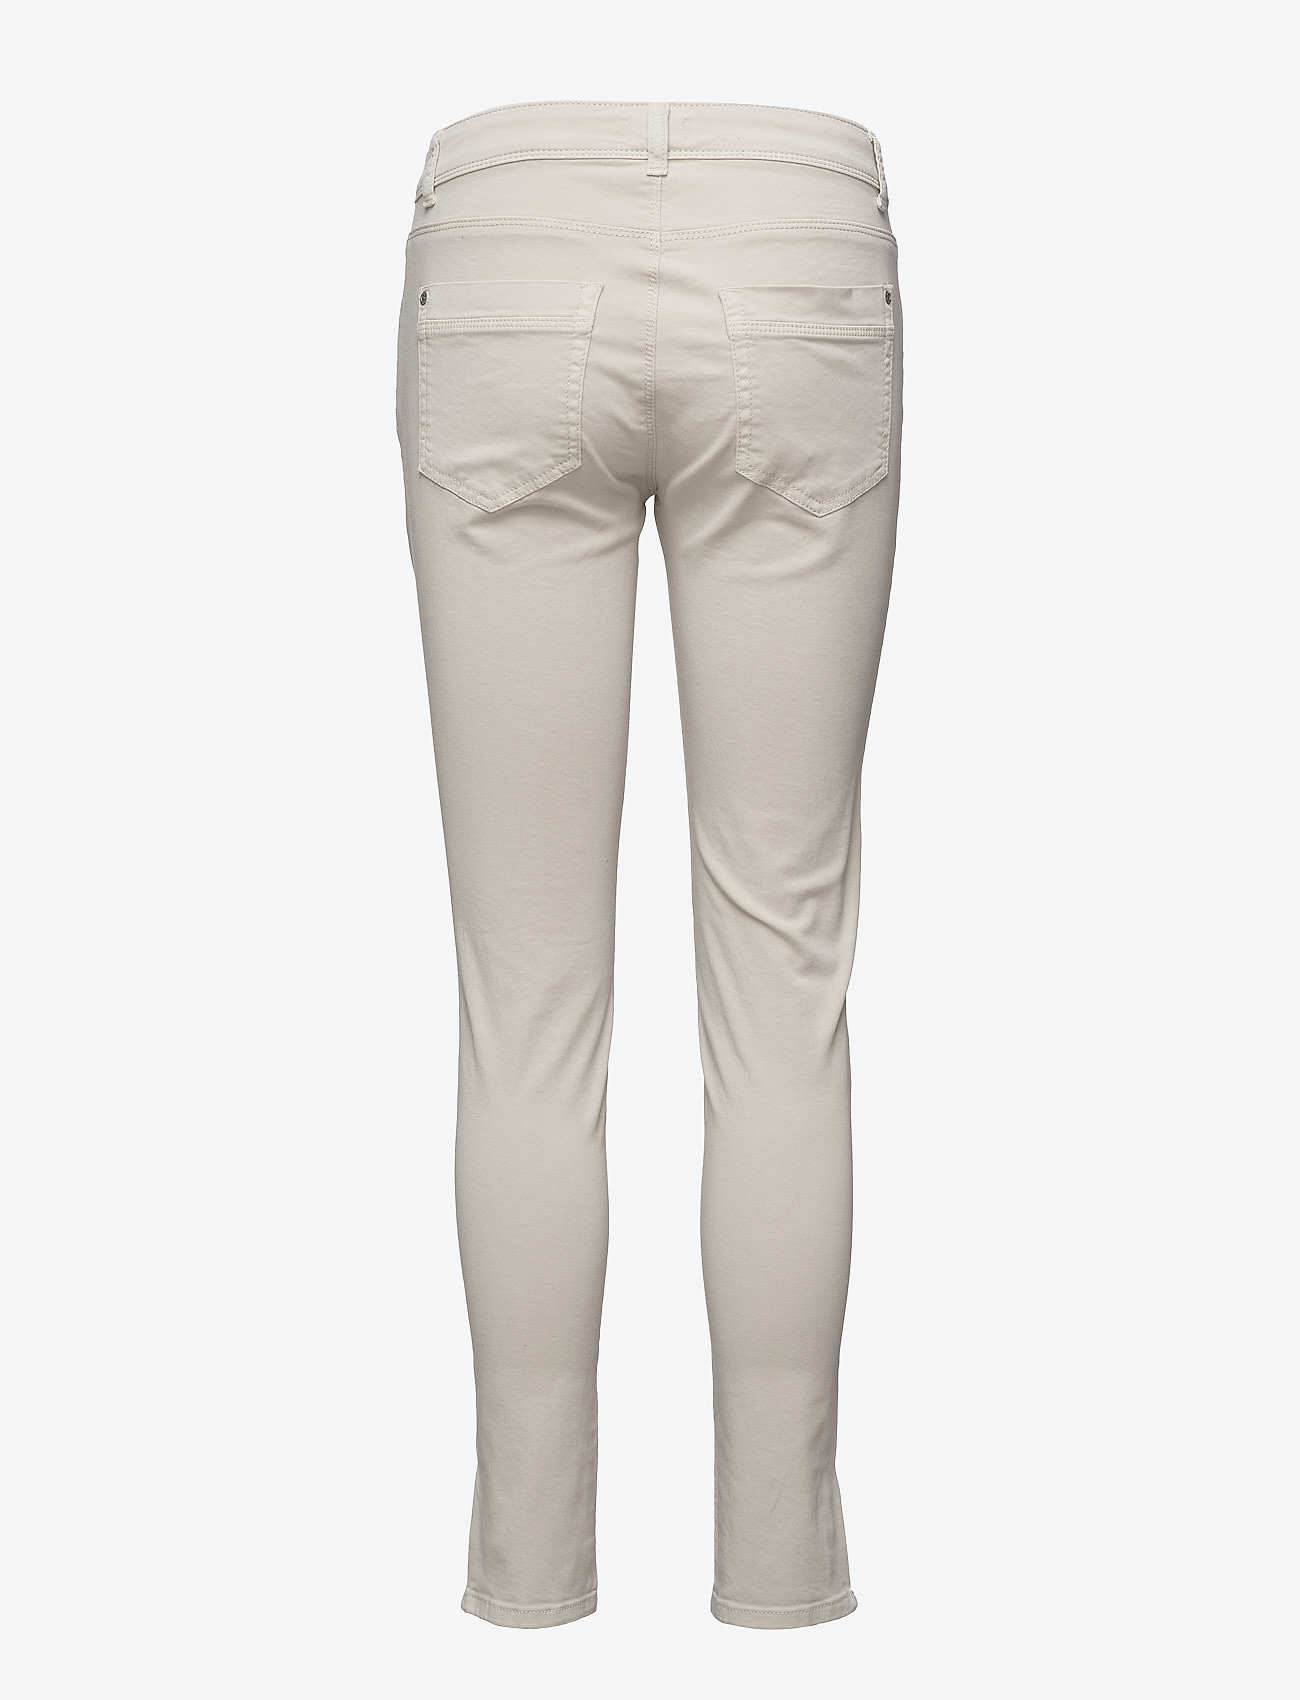 Signal - Jeans - trousers with skinny legs - pure cashmere - 1